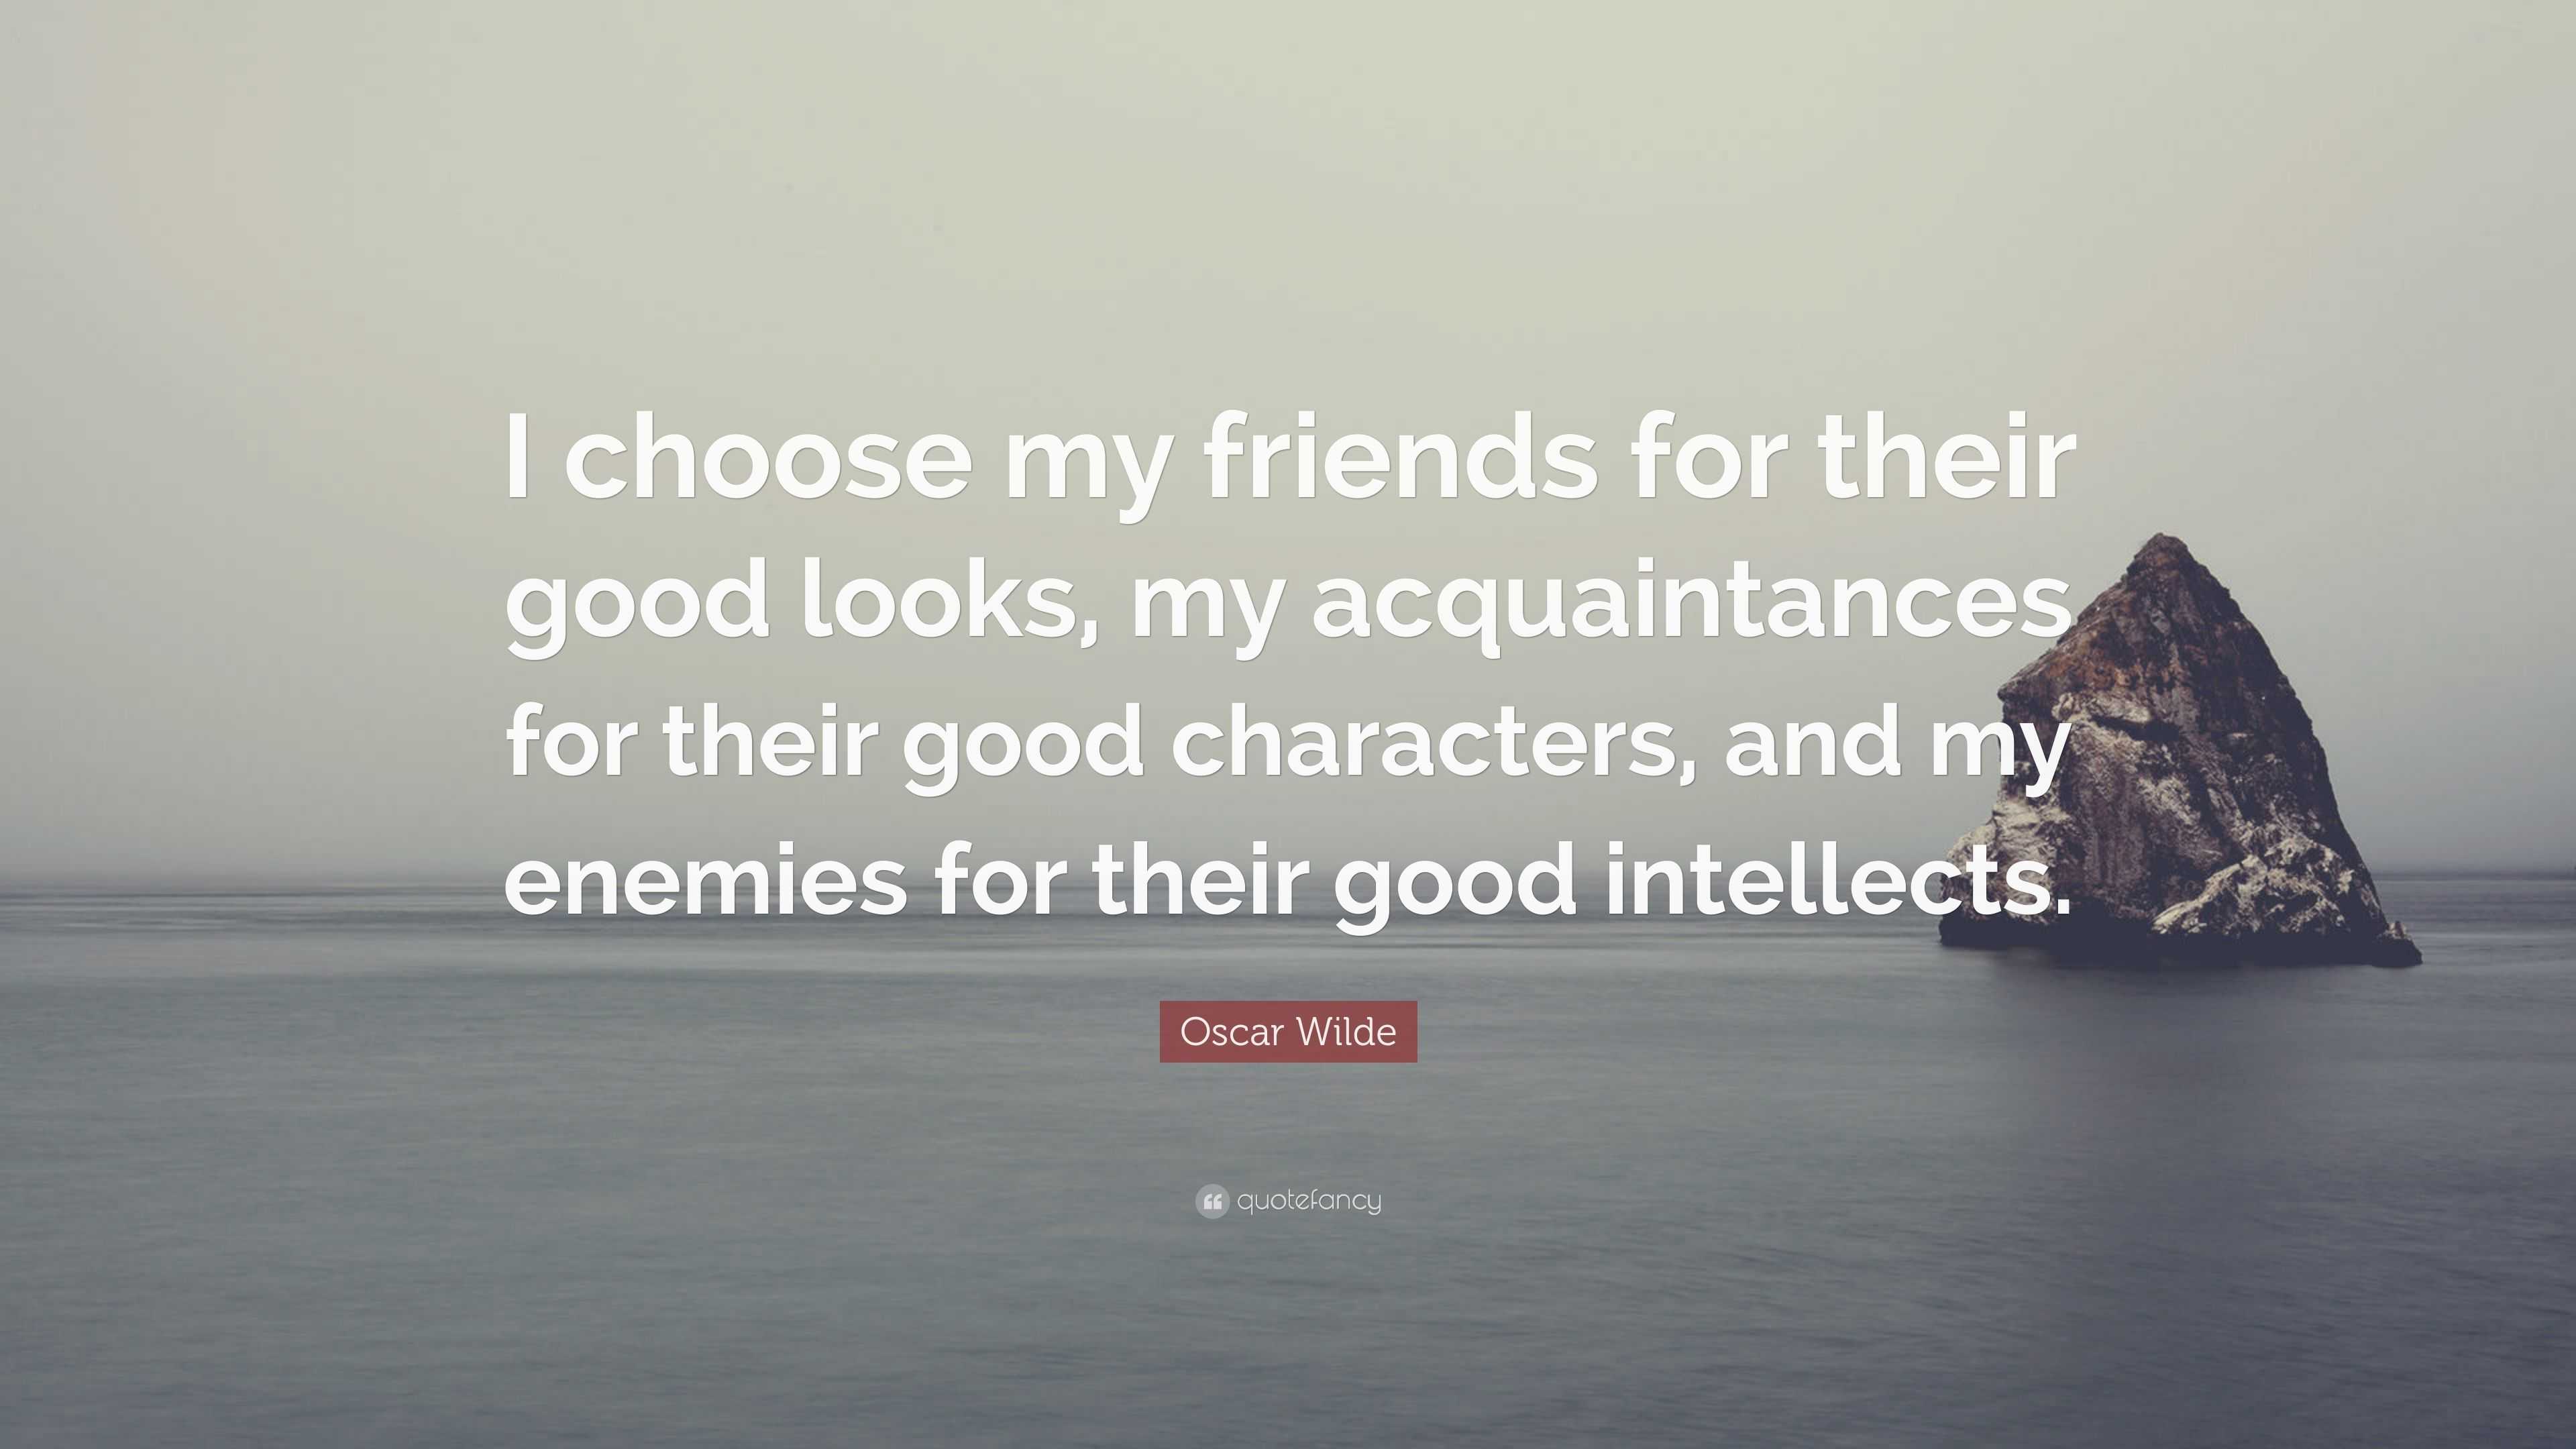 I choose my friends for their good looks, my acquaintances for their good  characters, and my enemies for their good intellects.